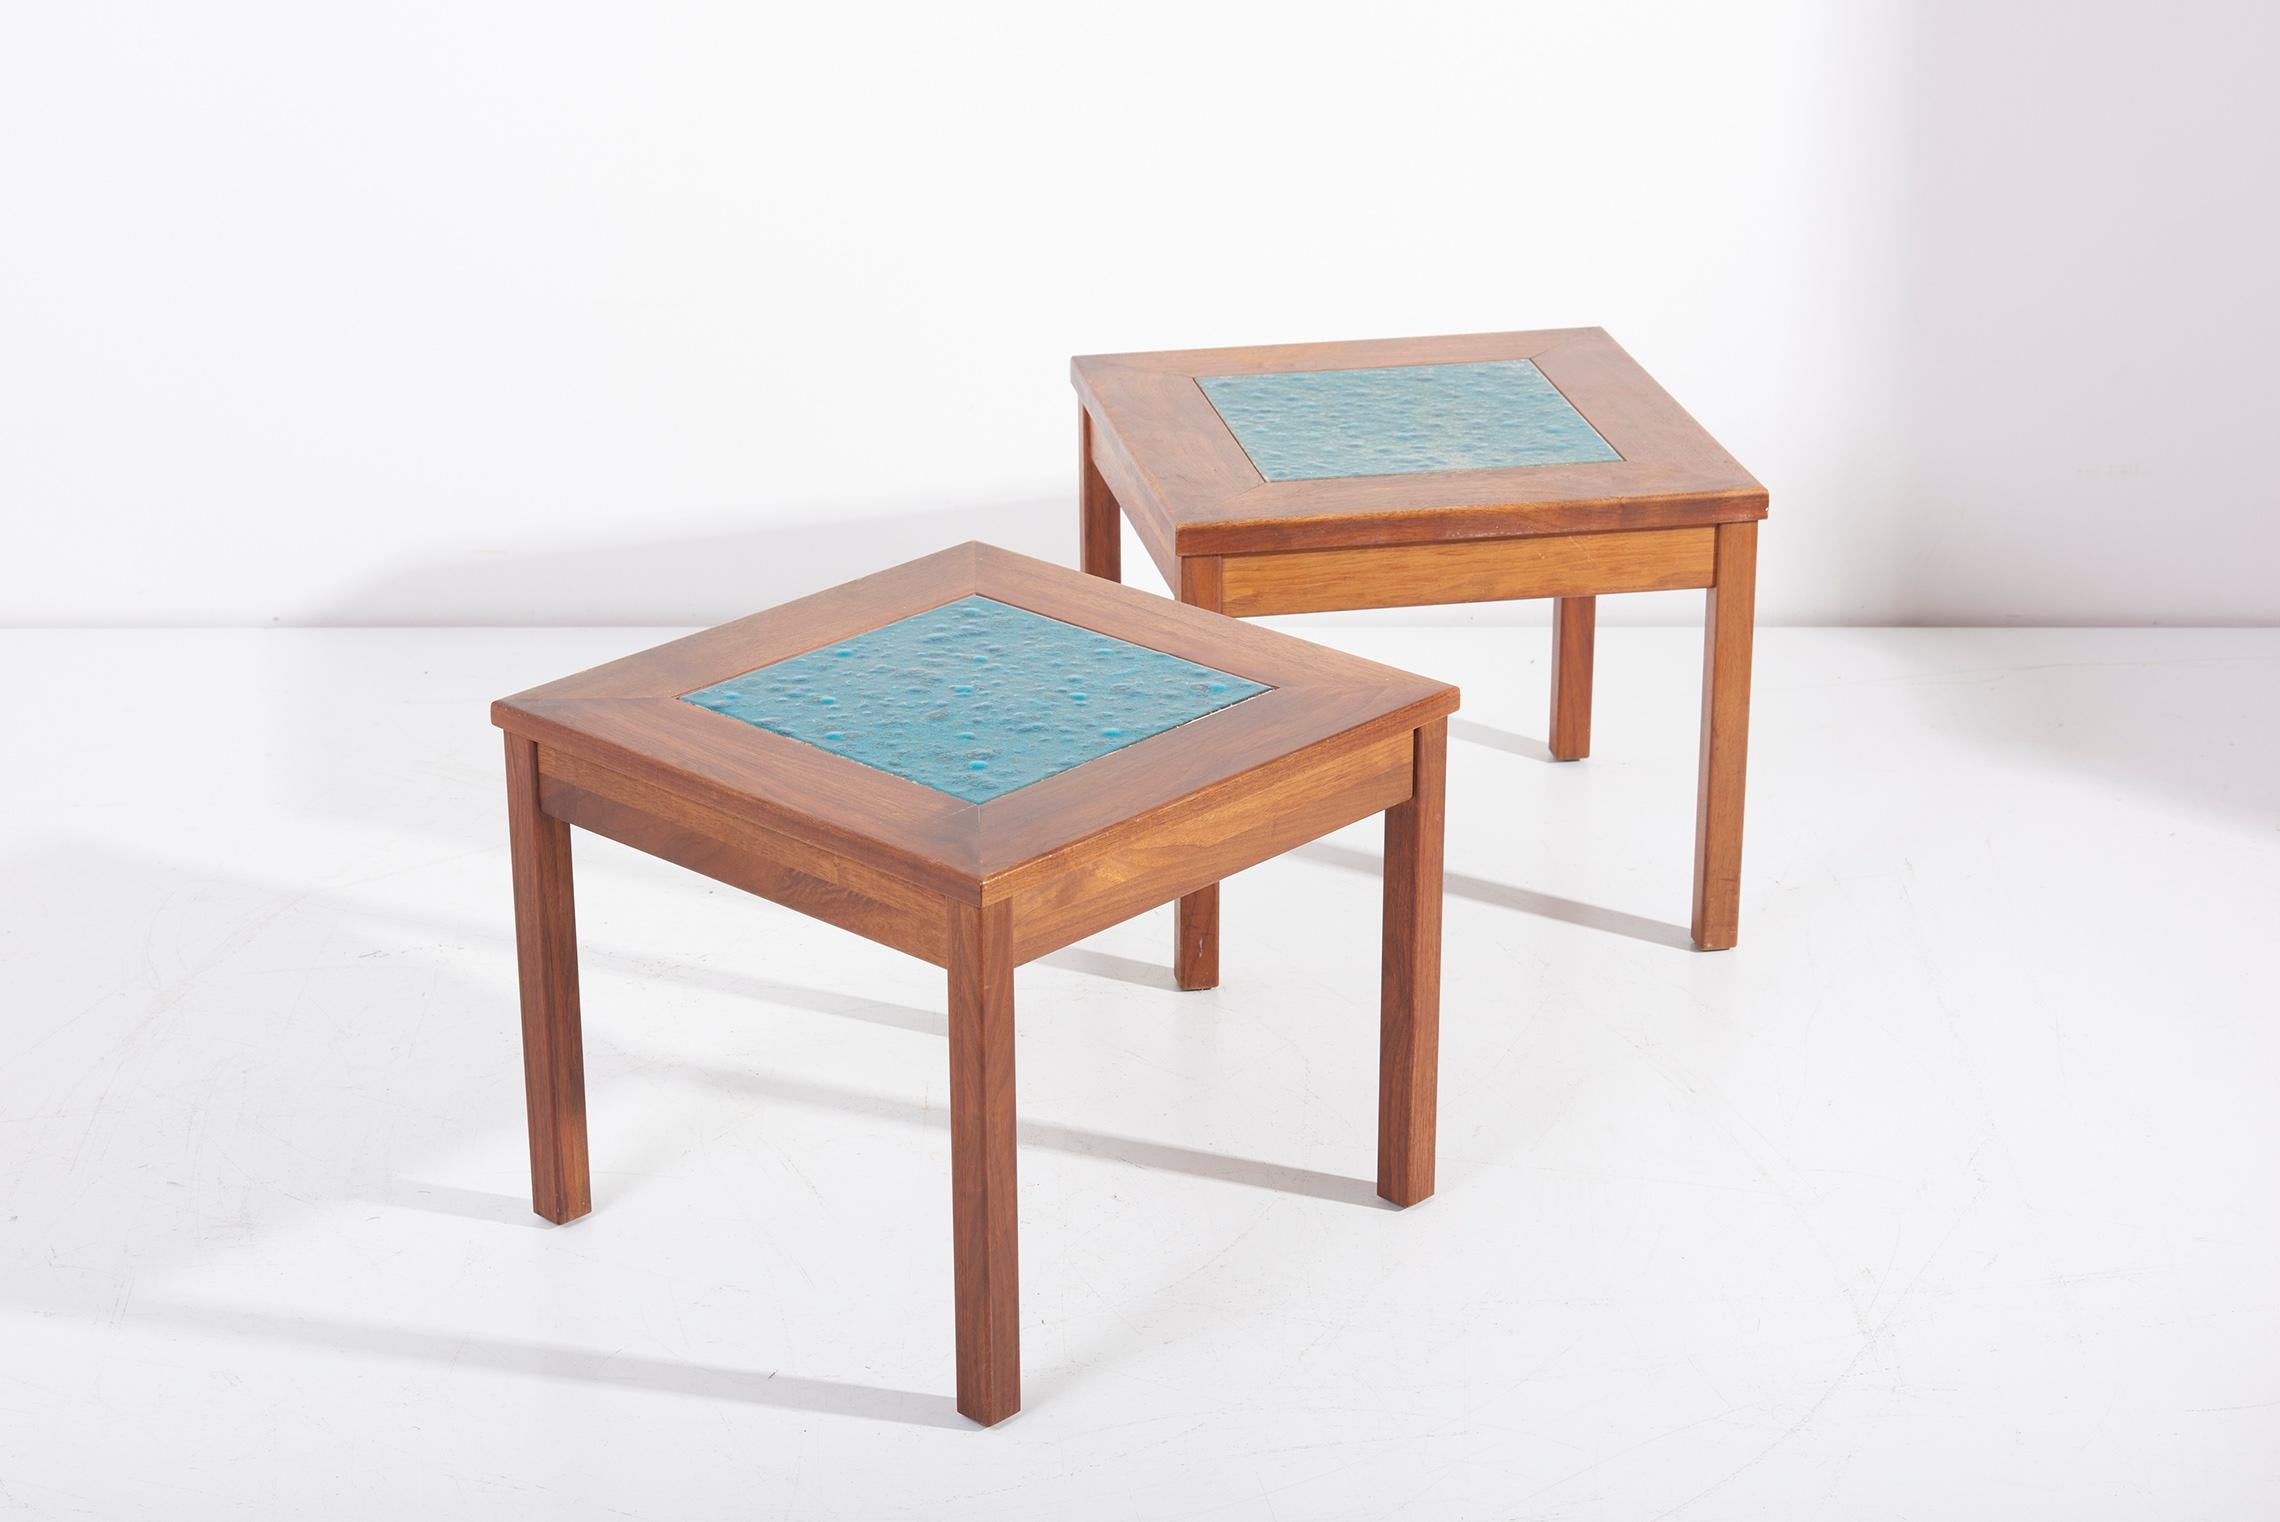 Signed pair of side tables or nightstands by John Keal for Brown Saltman in solid walnut and a copper inlay. Excellent condition.

